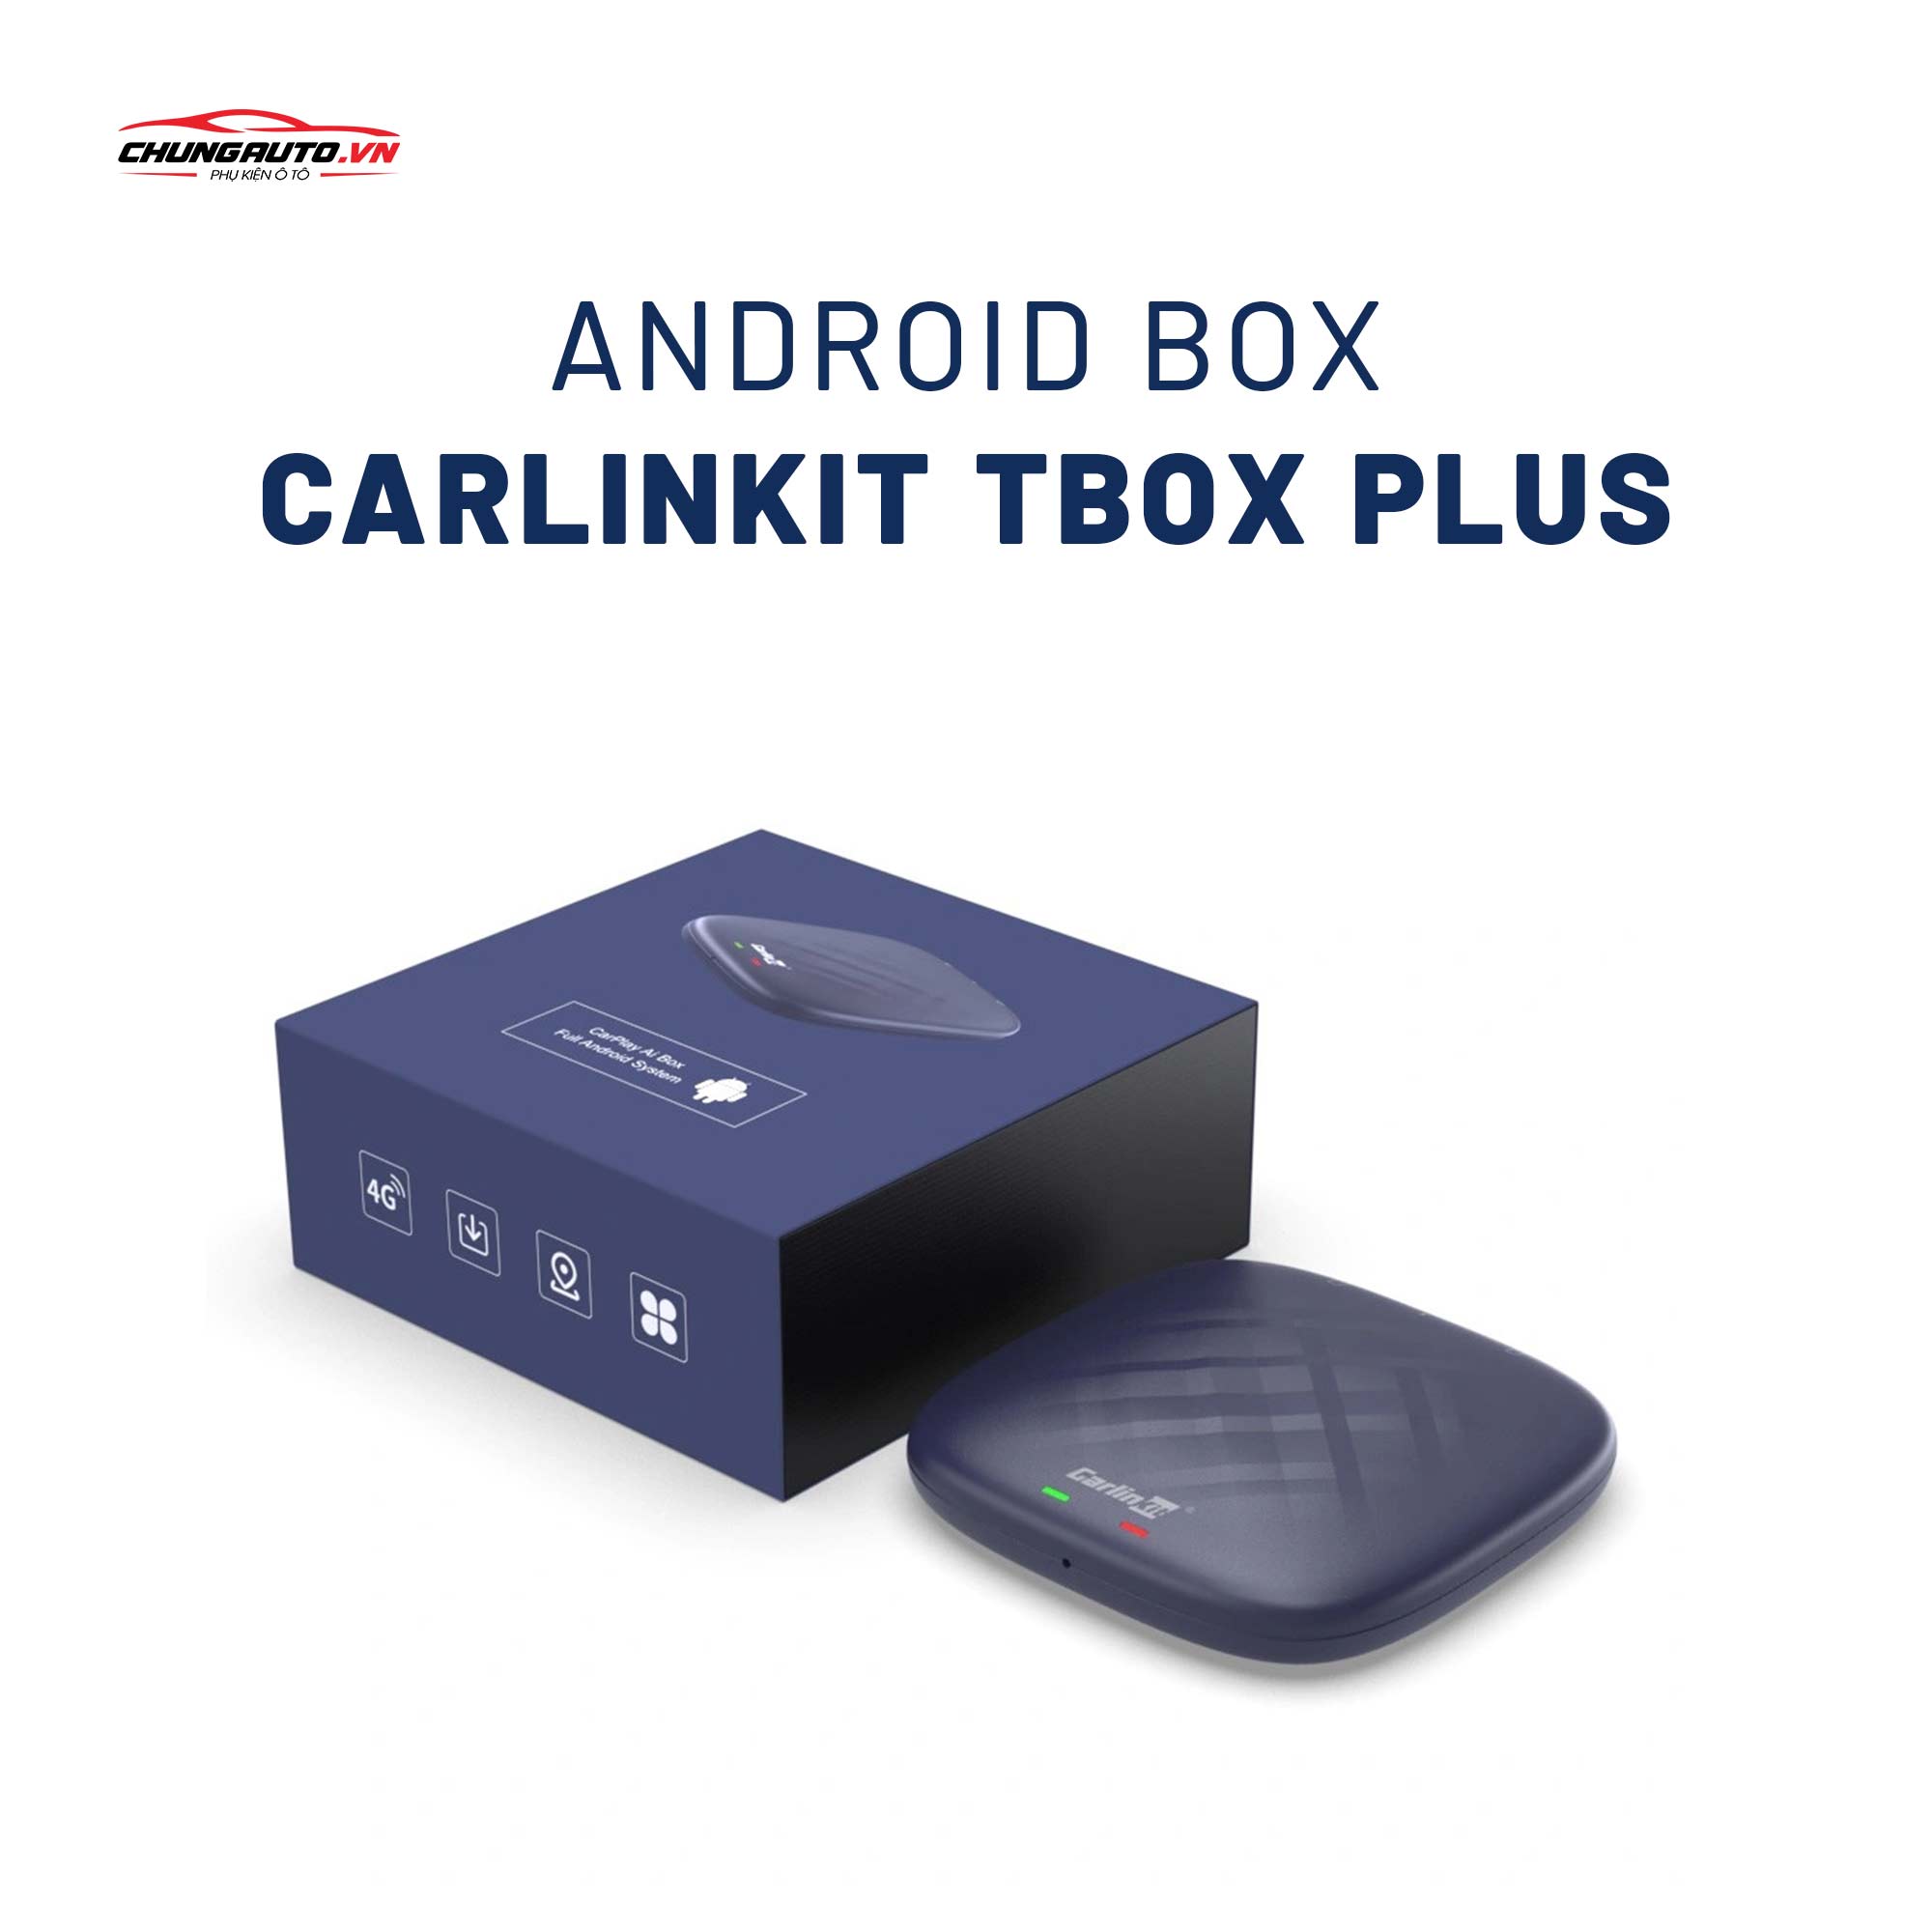 Android box carlinkit tbox plus